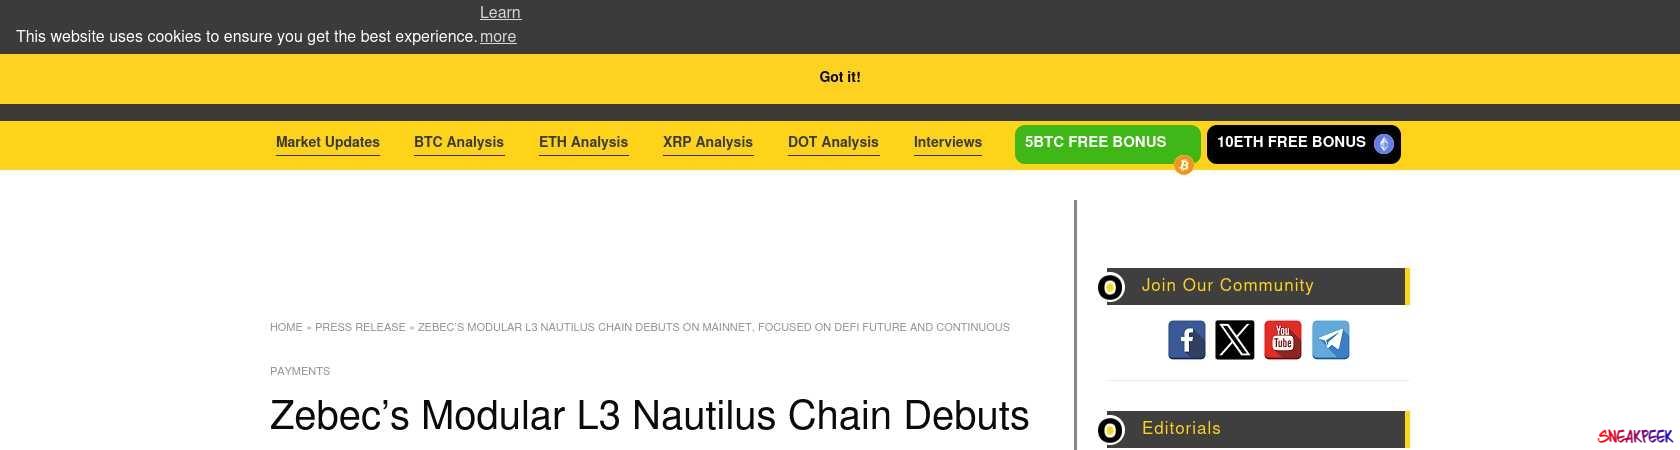 Read the full Article:  ⭲ Zebec’s Modular L3 Nautilus Chain Debuts on Mainnet, Focused on DeFi Future and Continuous Payments